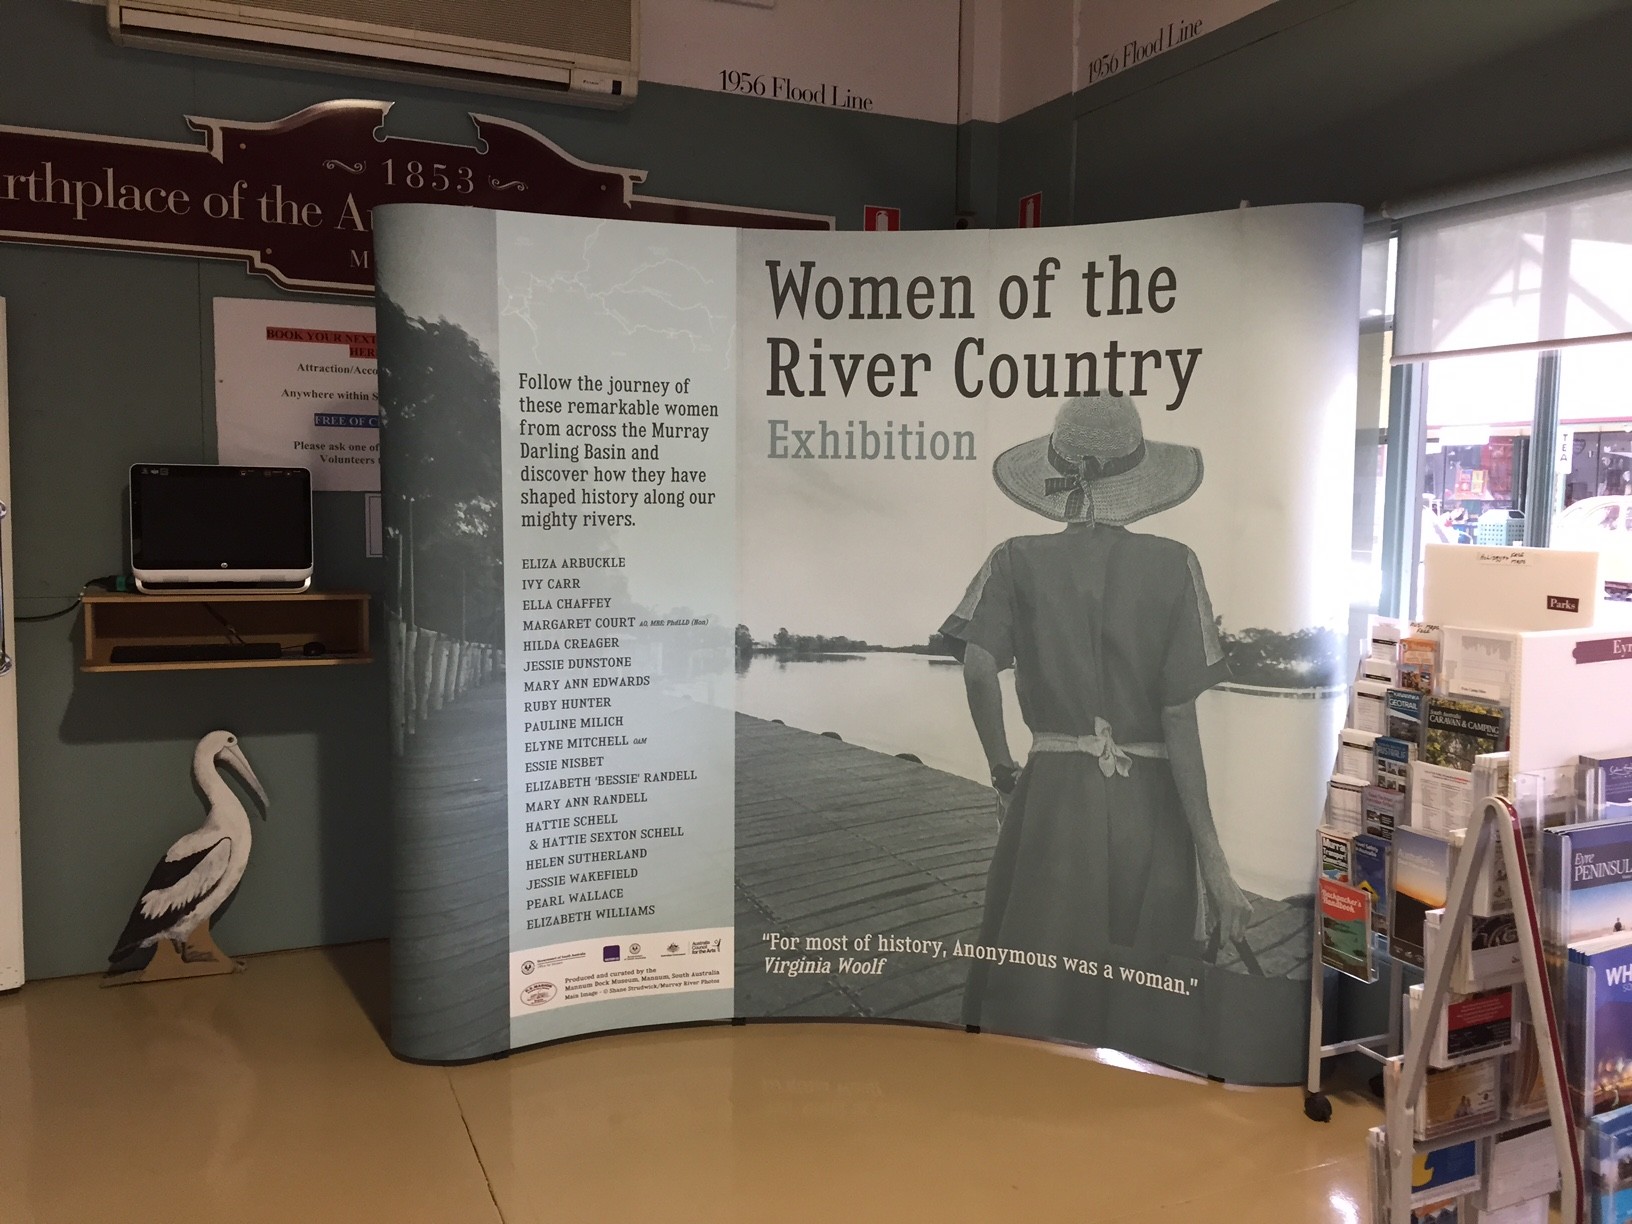 Women of the River Country Exhibition